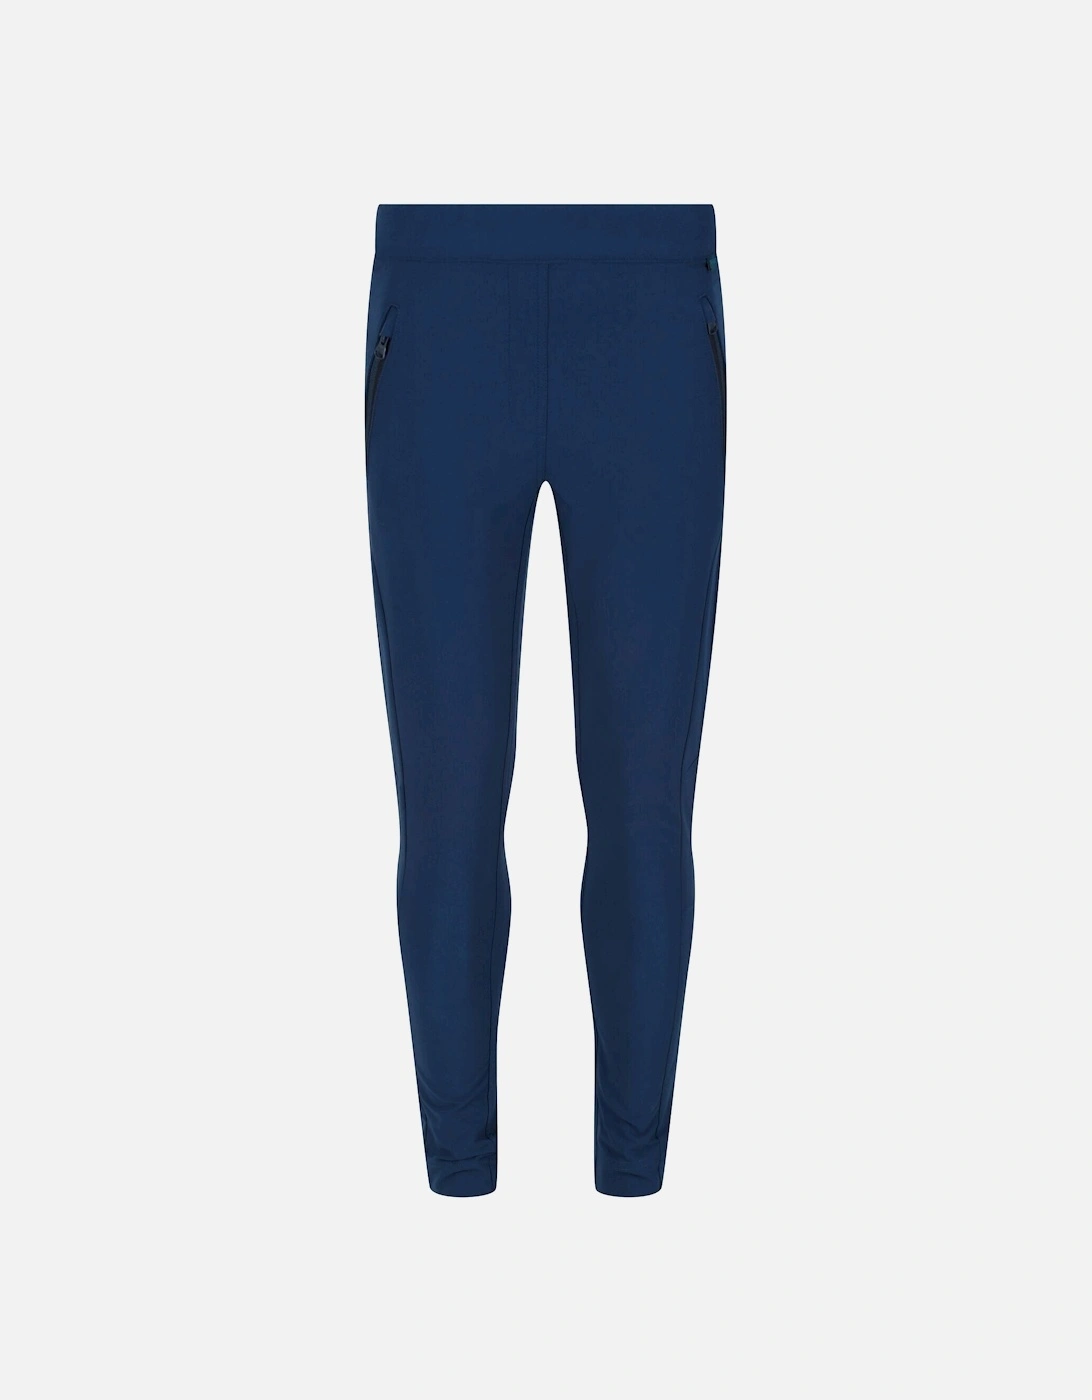 Childrens/Kids Pentre Trousers, 6 of 5